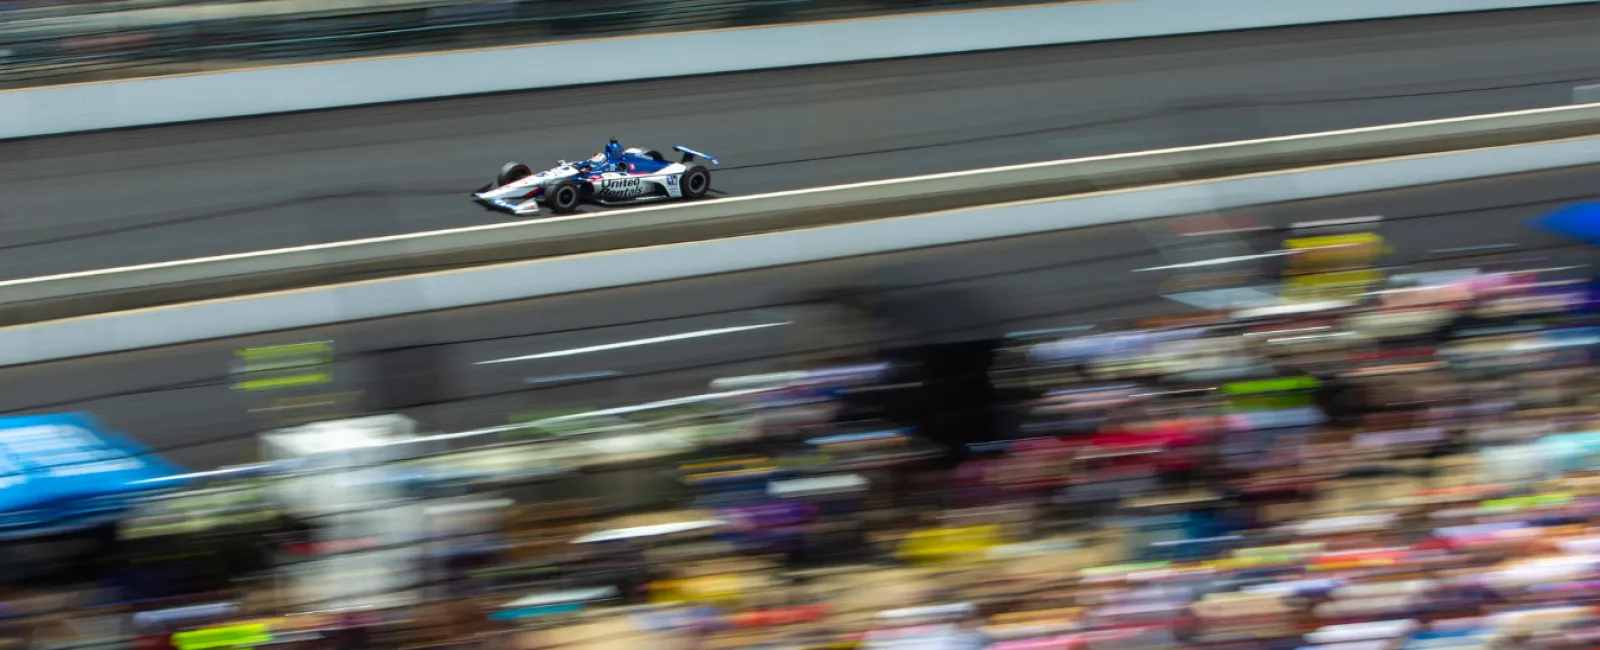 104th Indianapolis 500 Presented by Gainbridge Rescheduled for Sunday, Aug. 23